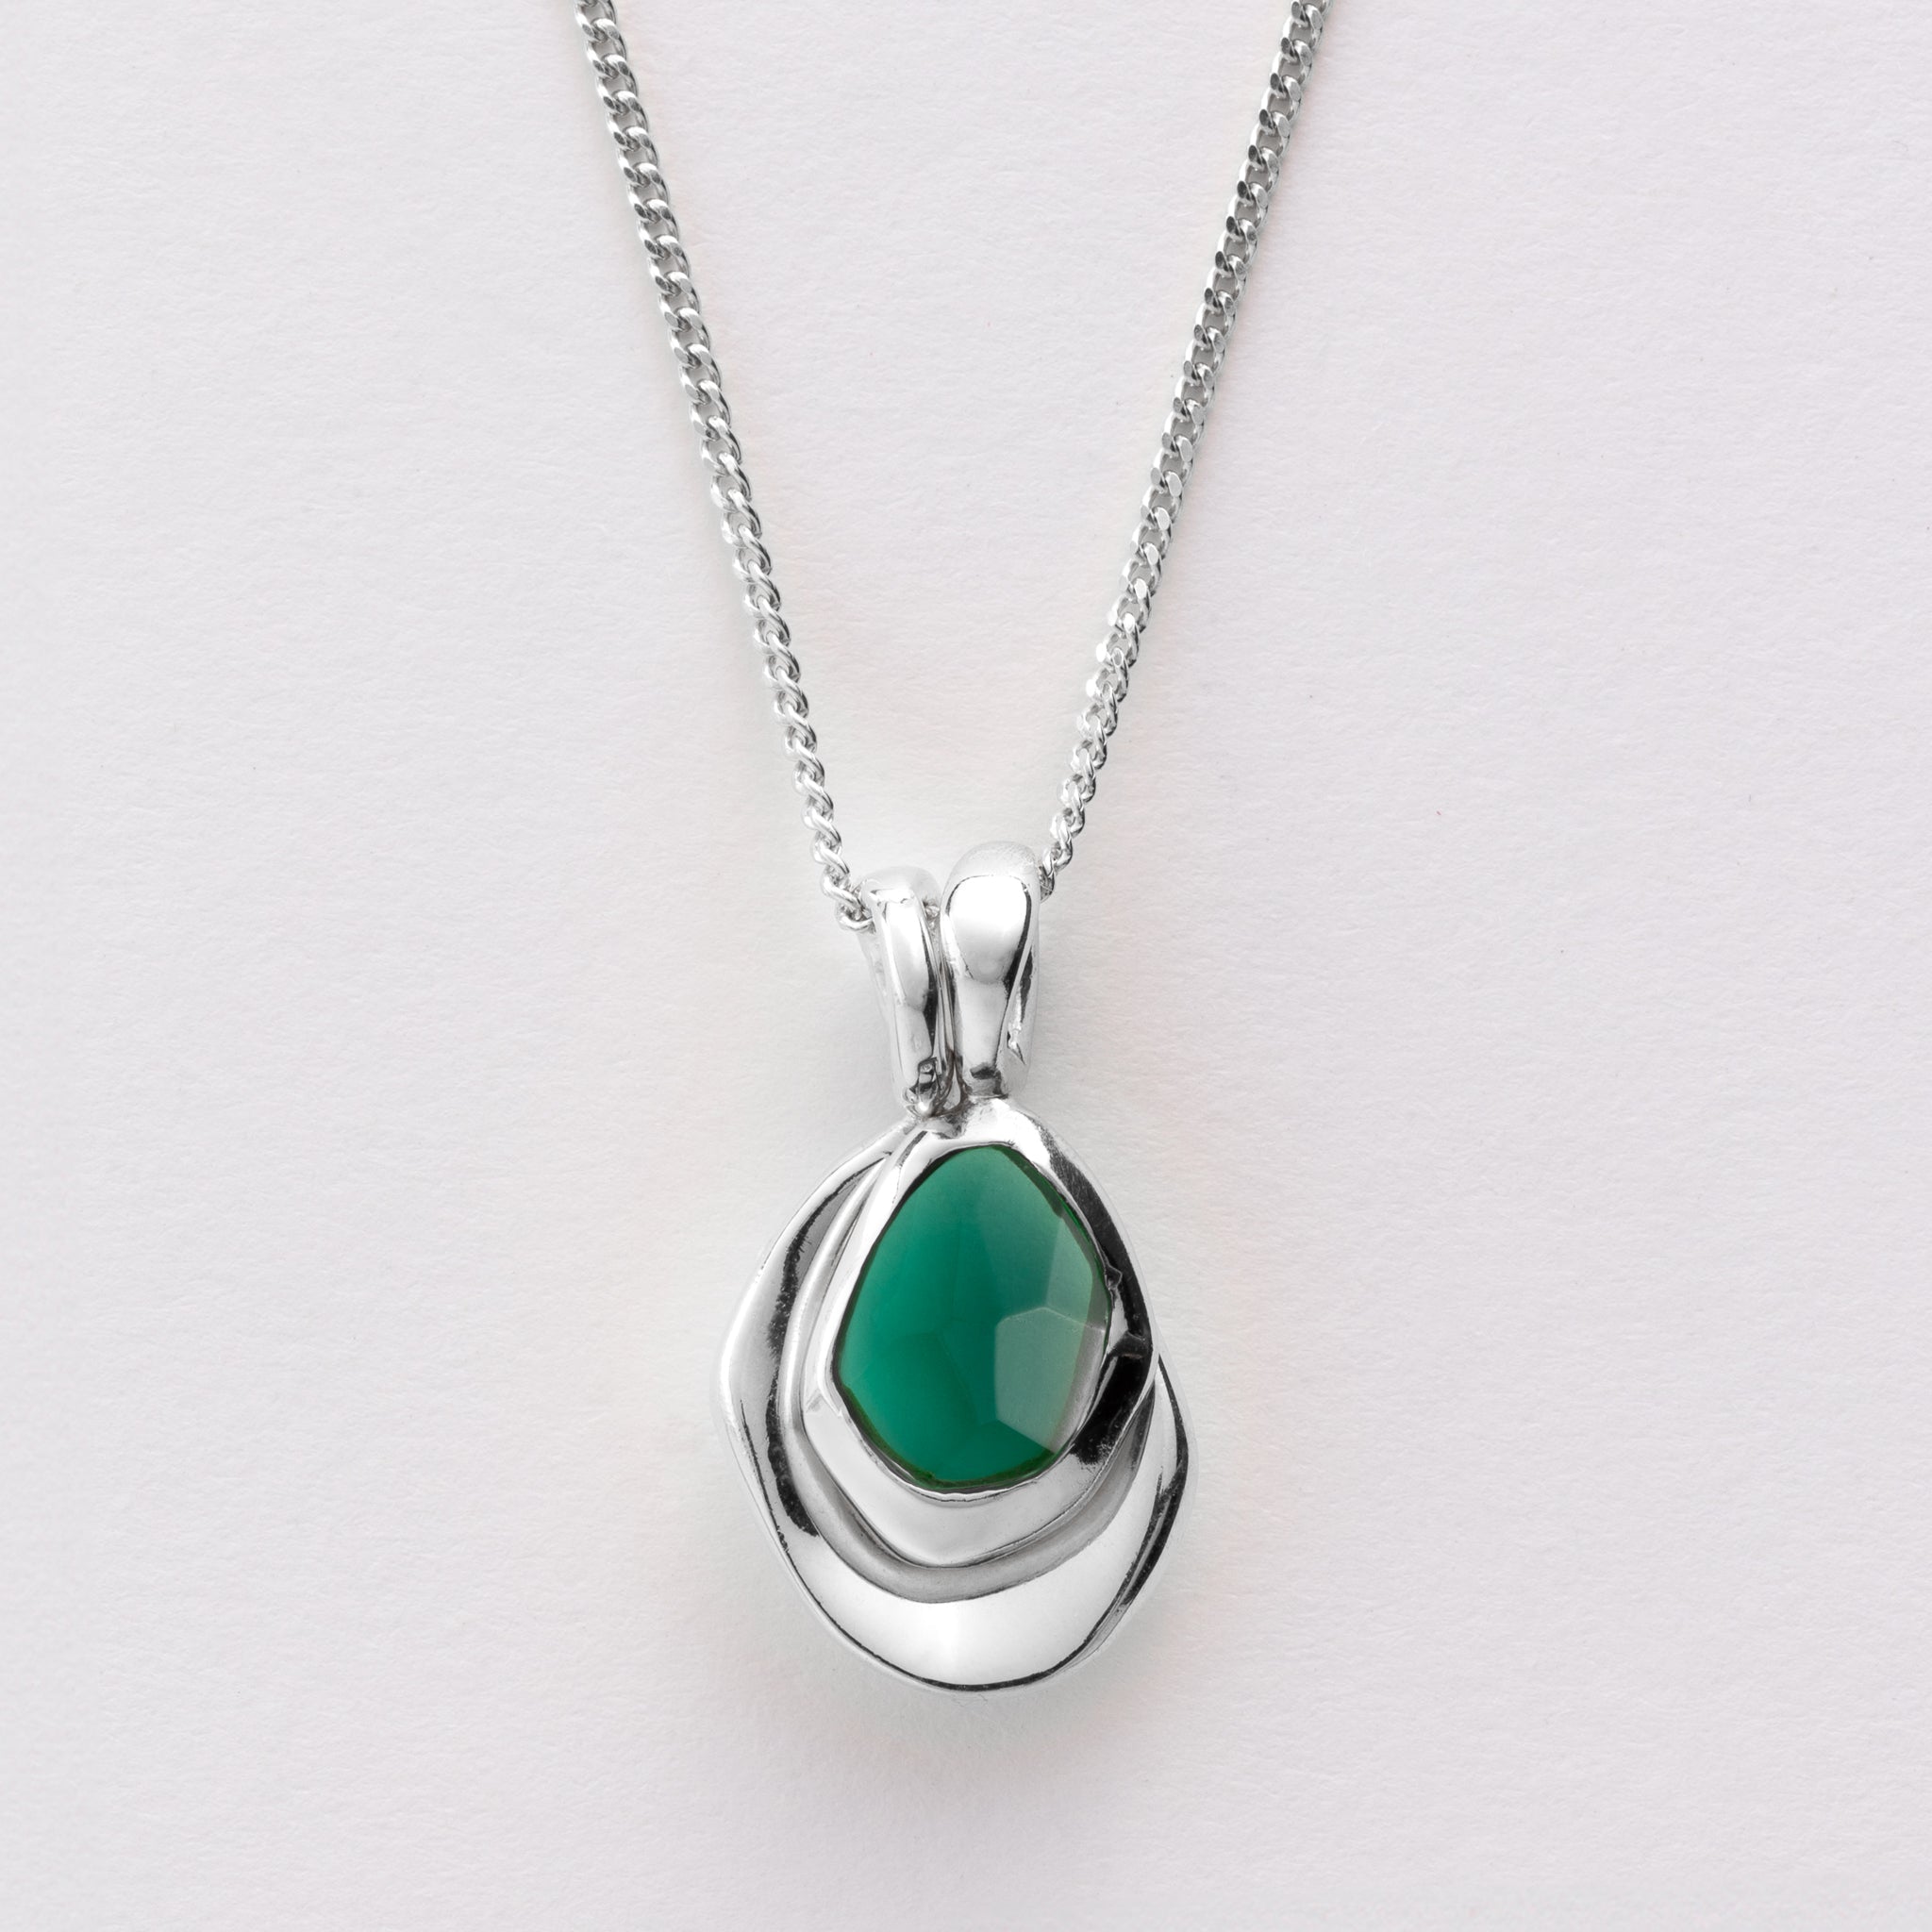 Pebble Charms necklace features a smooth, polished Pebble charm, nestled alongside a sparkling handcut Gemstone charm.